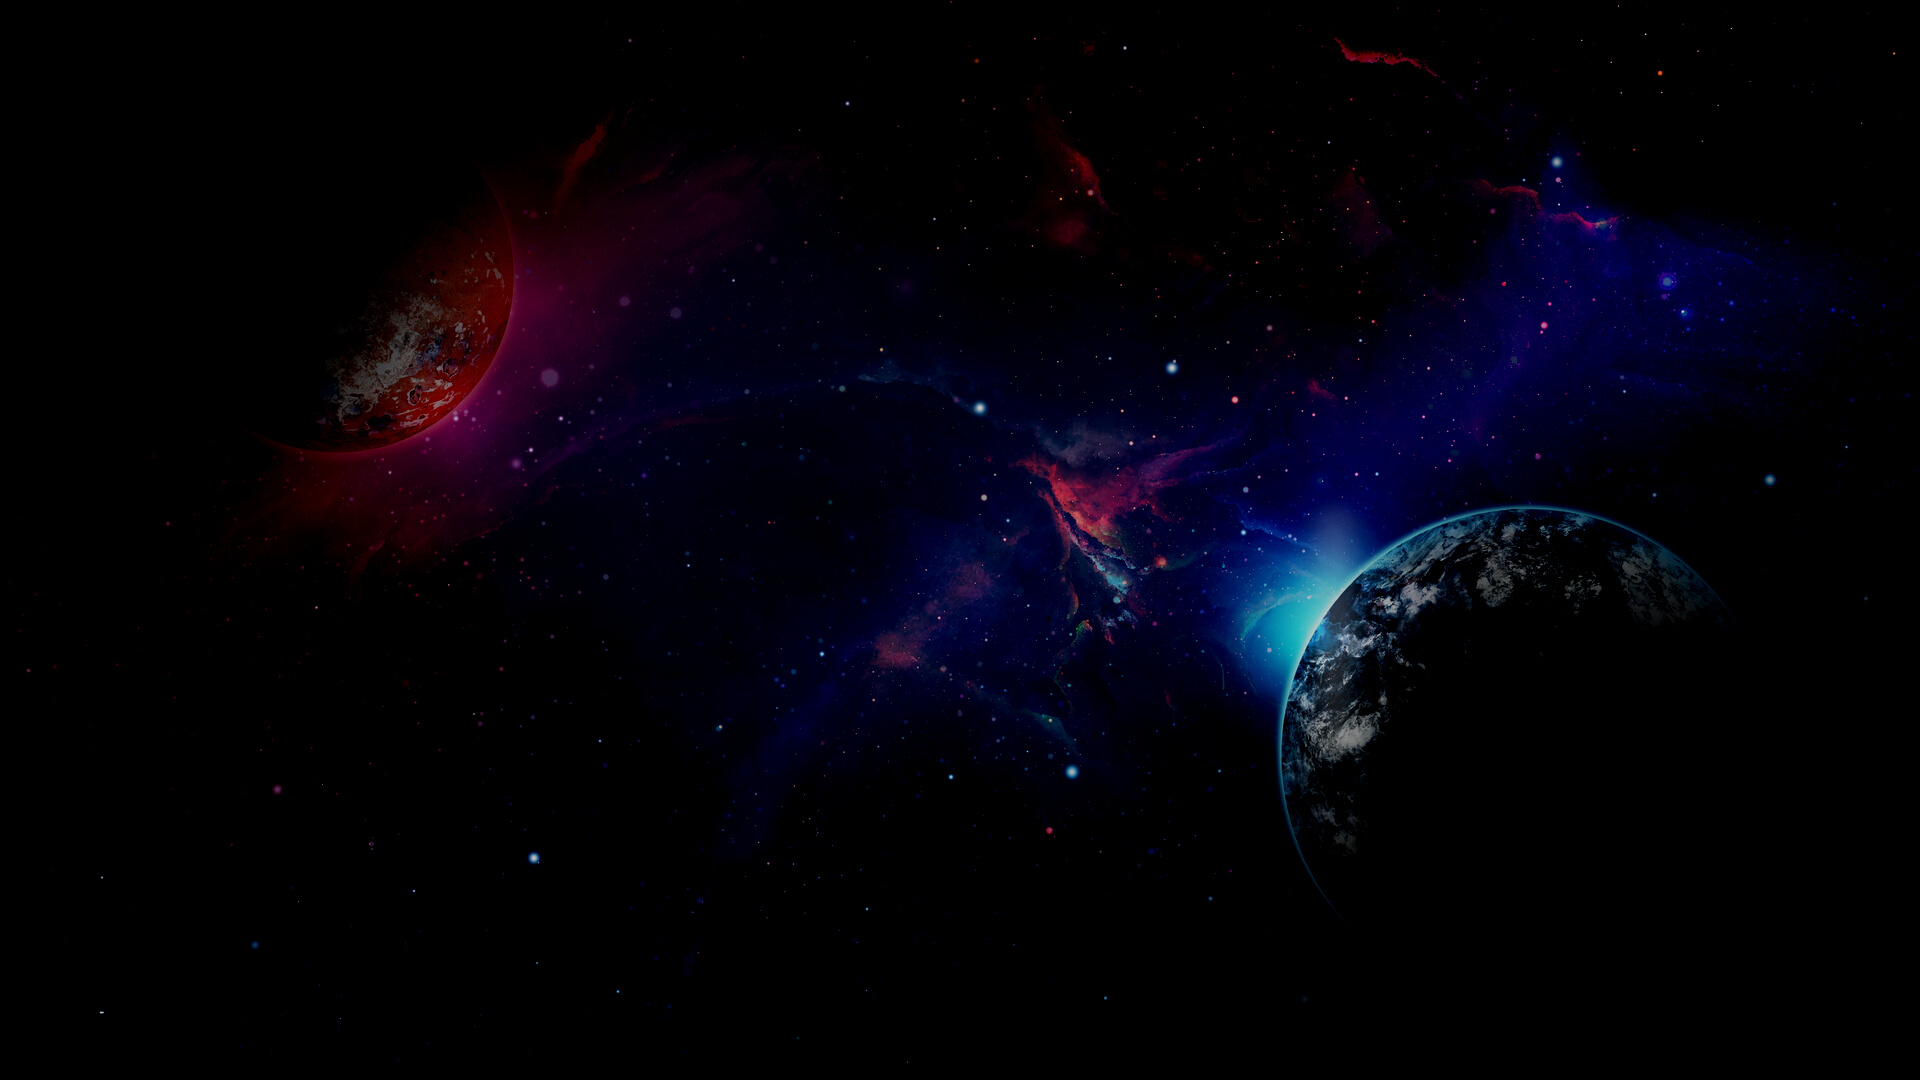 Space, Galaxy, Universe, Planet, Cosmos, Background